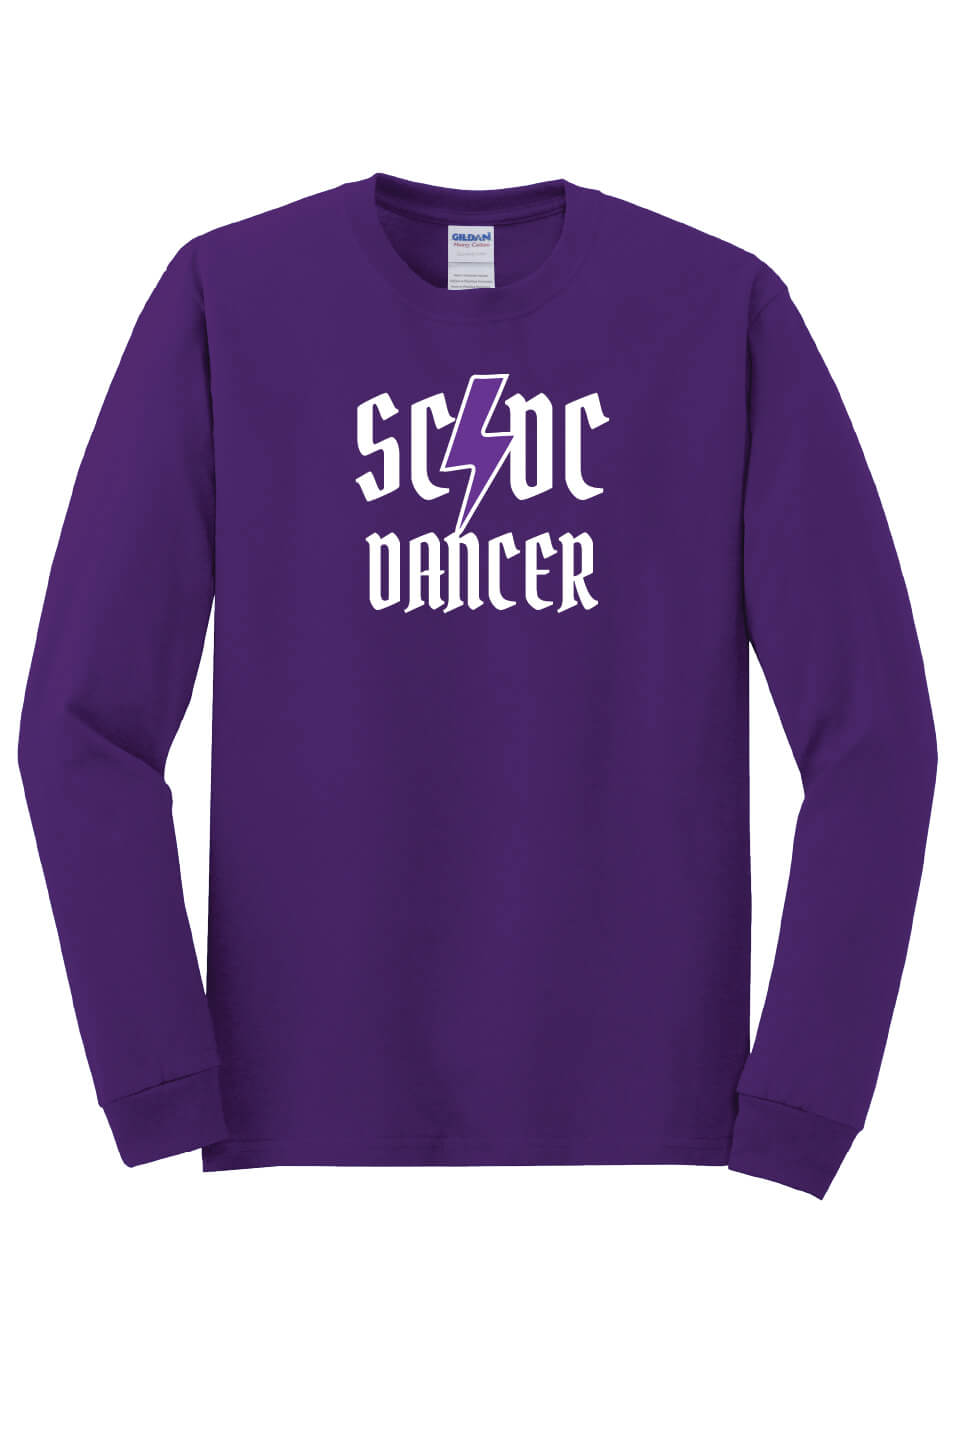 SCDC Dancer Long Sleeve T-Shirt (Youth) purple